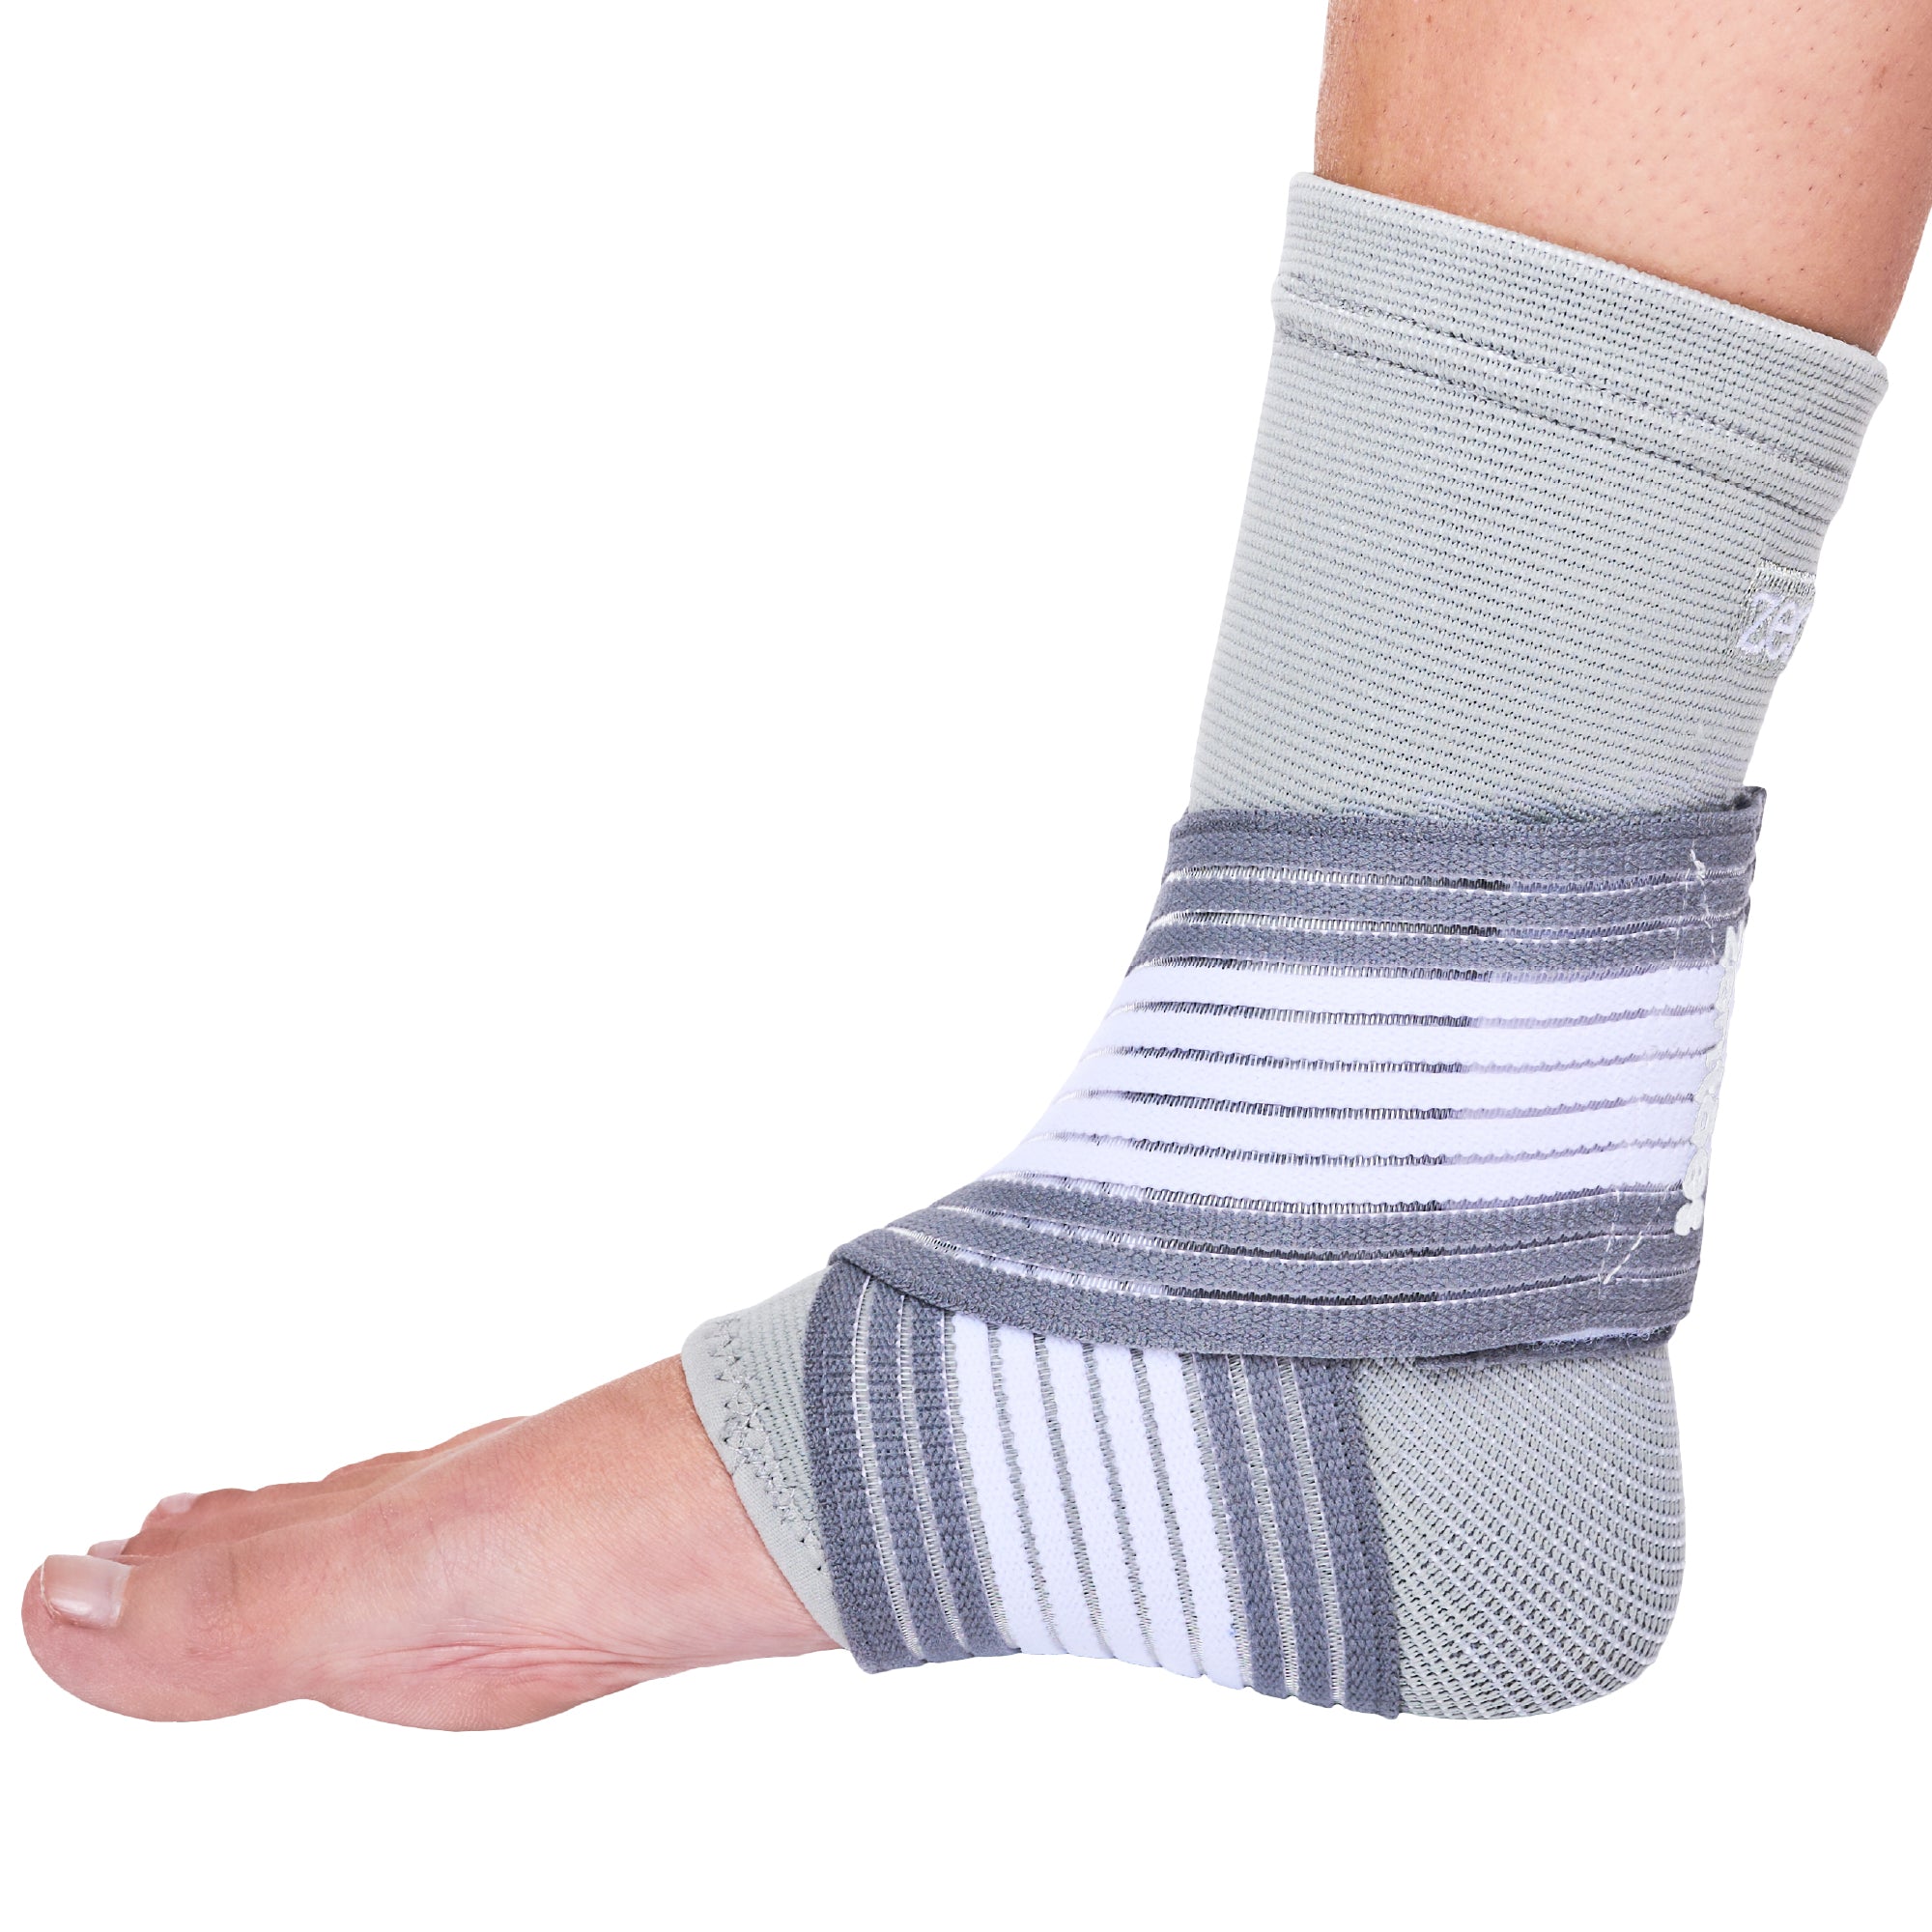 COMING SOON! Ankle Support Brace - ZenToes